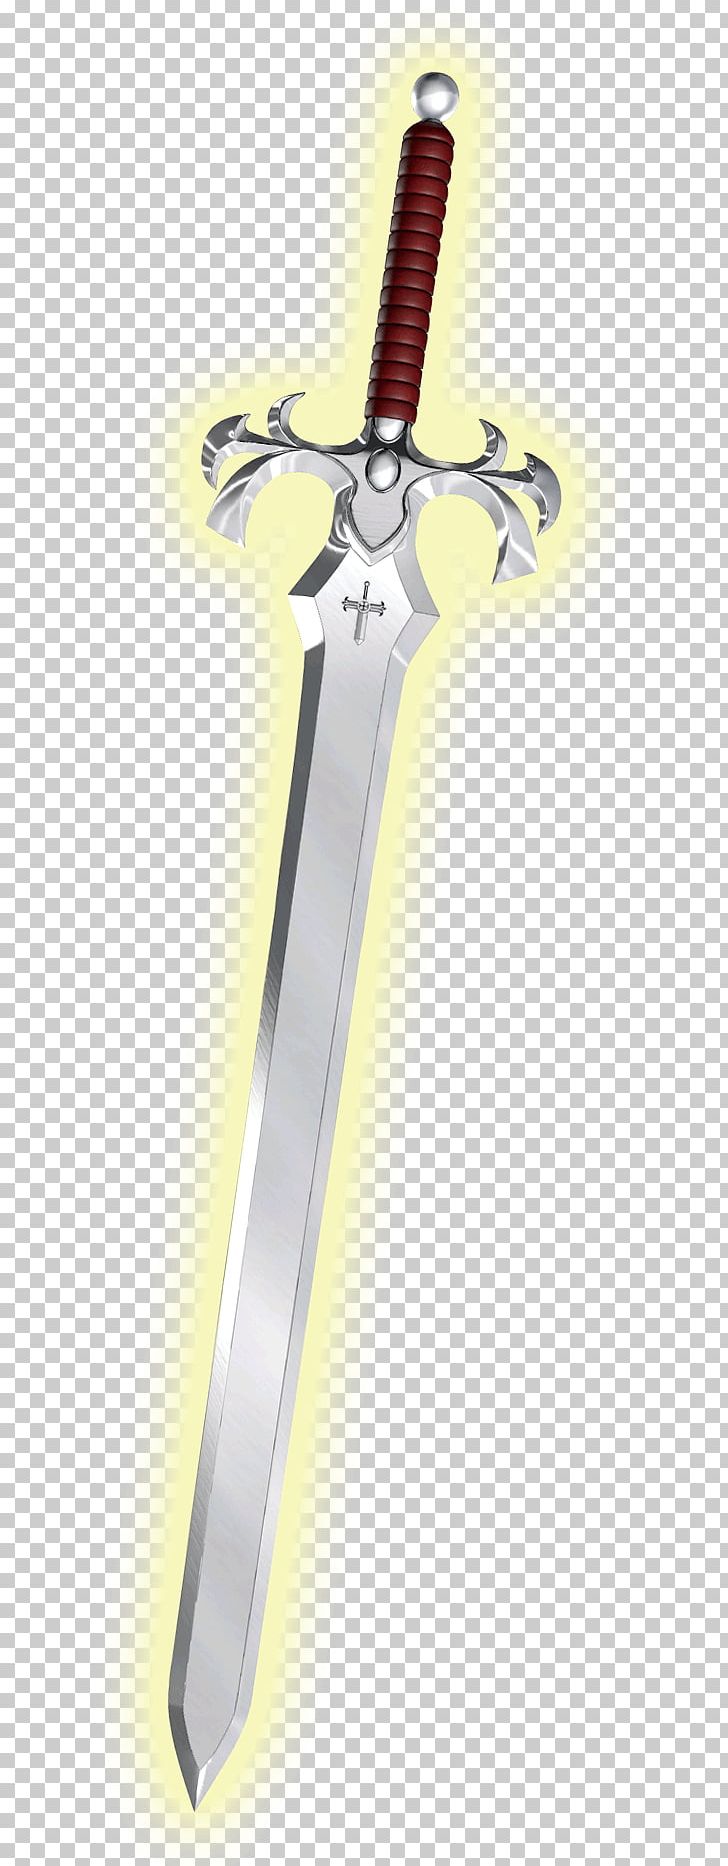 Weapon Sword Dagger Sabre PNG, Clipart, Cold Weapon, Cross, Dagger, King, Miscellaneous Free PNG Download